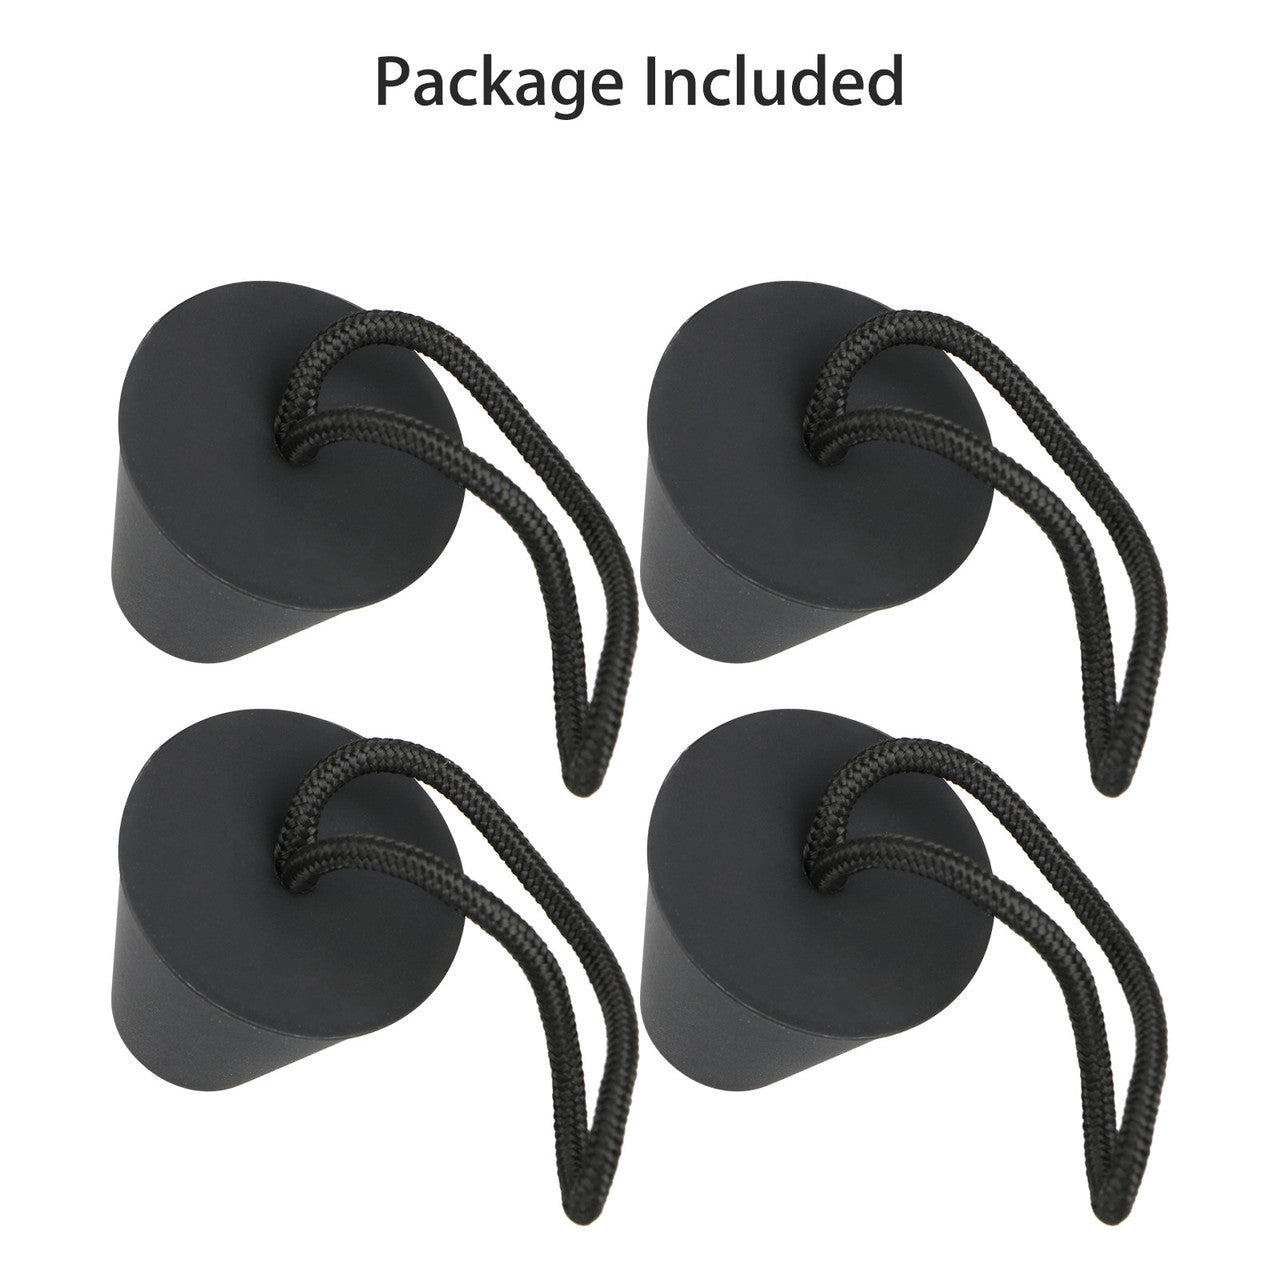 Silicone Black Universal Boat Kayak Scupper Plugs Set with String (fit All Major Brands), 4-pack